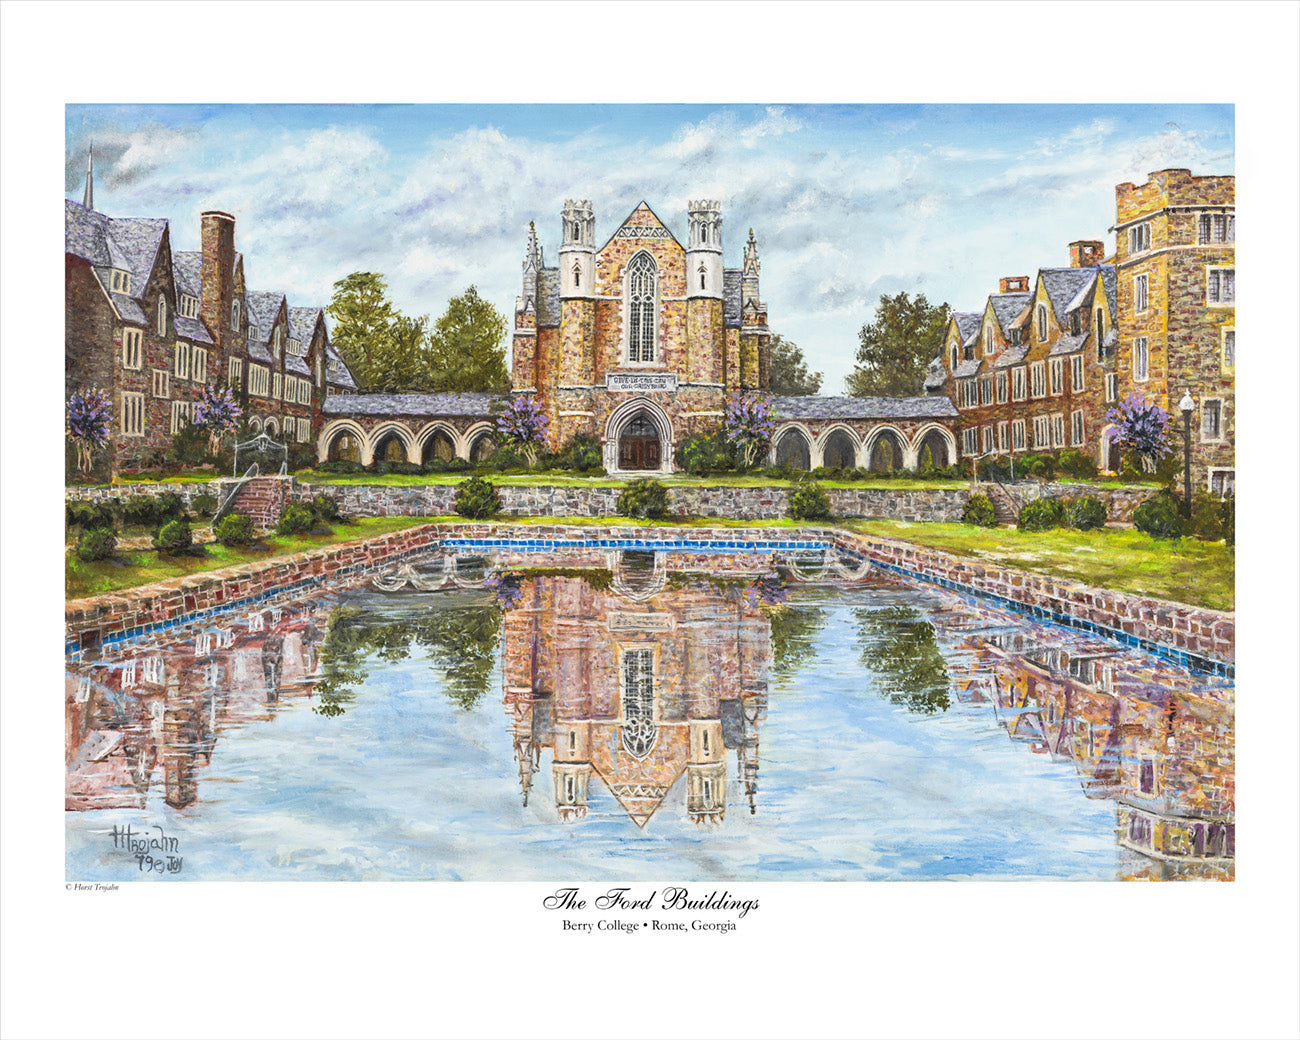 "The Ford Buildings at Berry College" Print